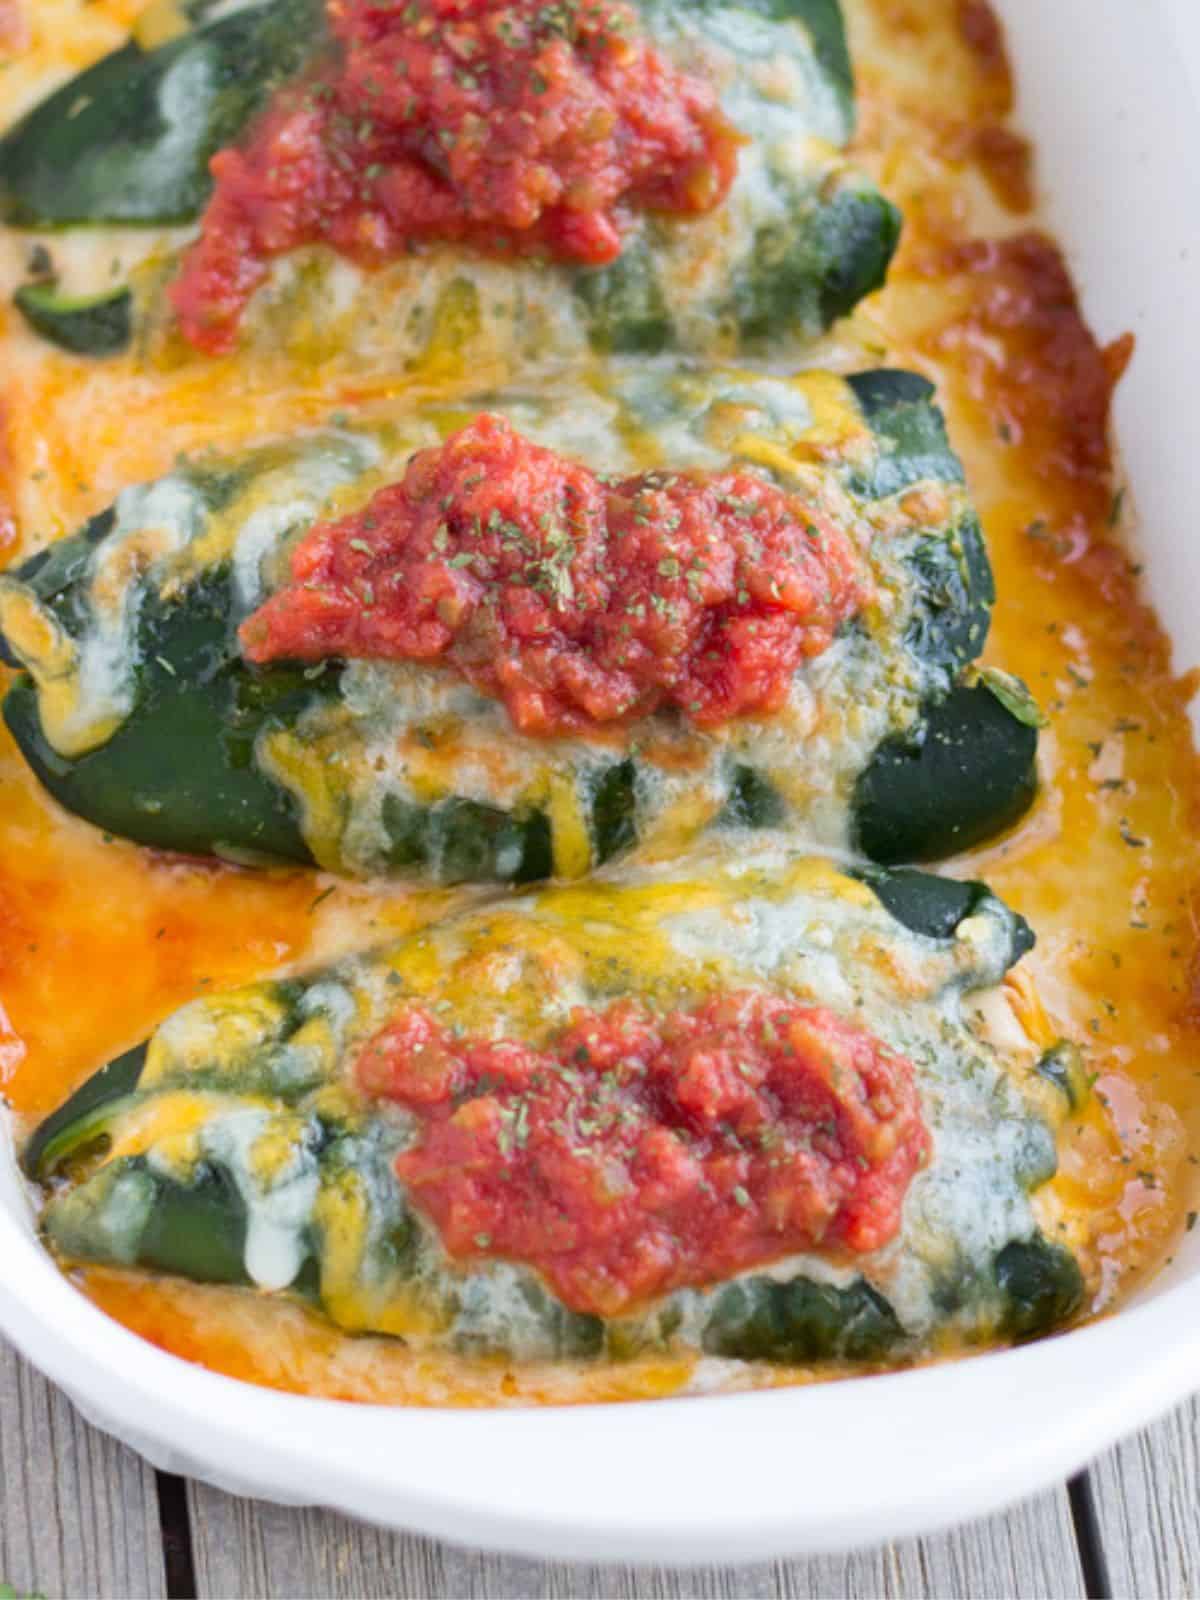 Casserole dish with 3 poblano peppers covered with cheese and salsa.